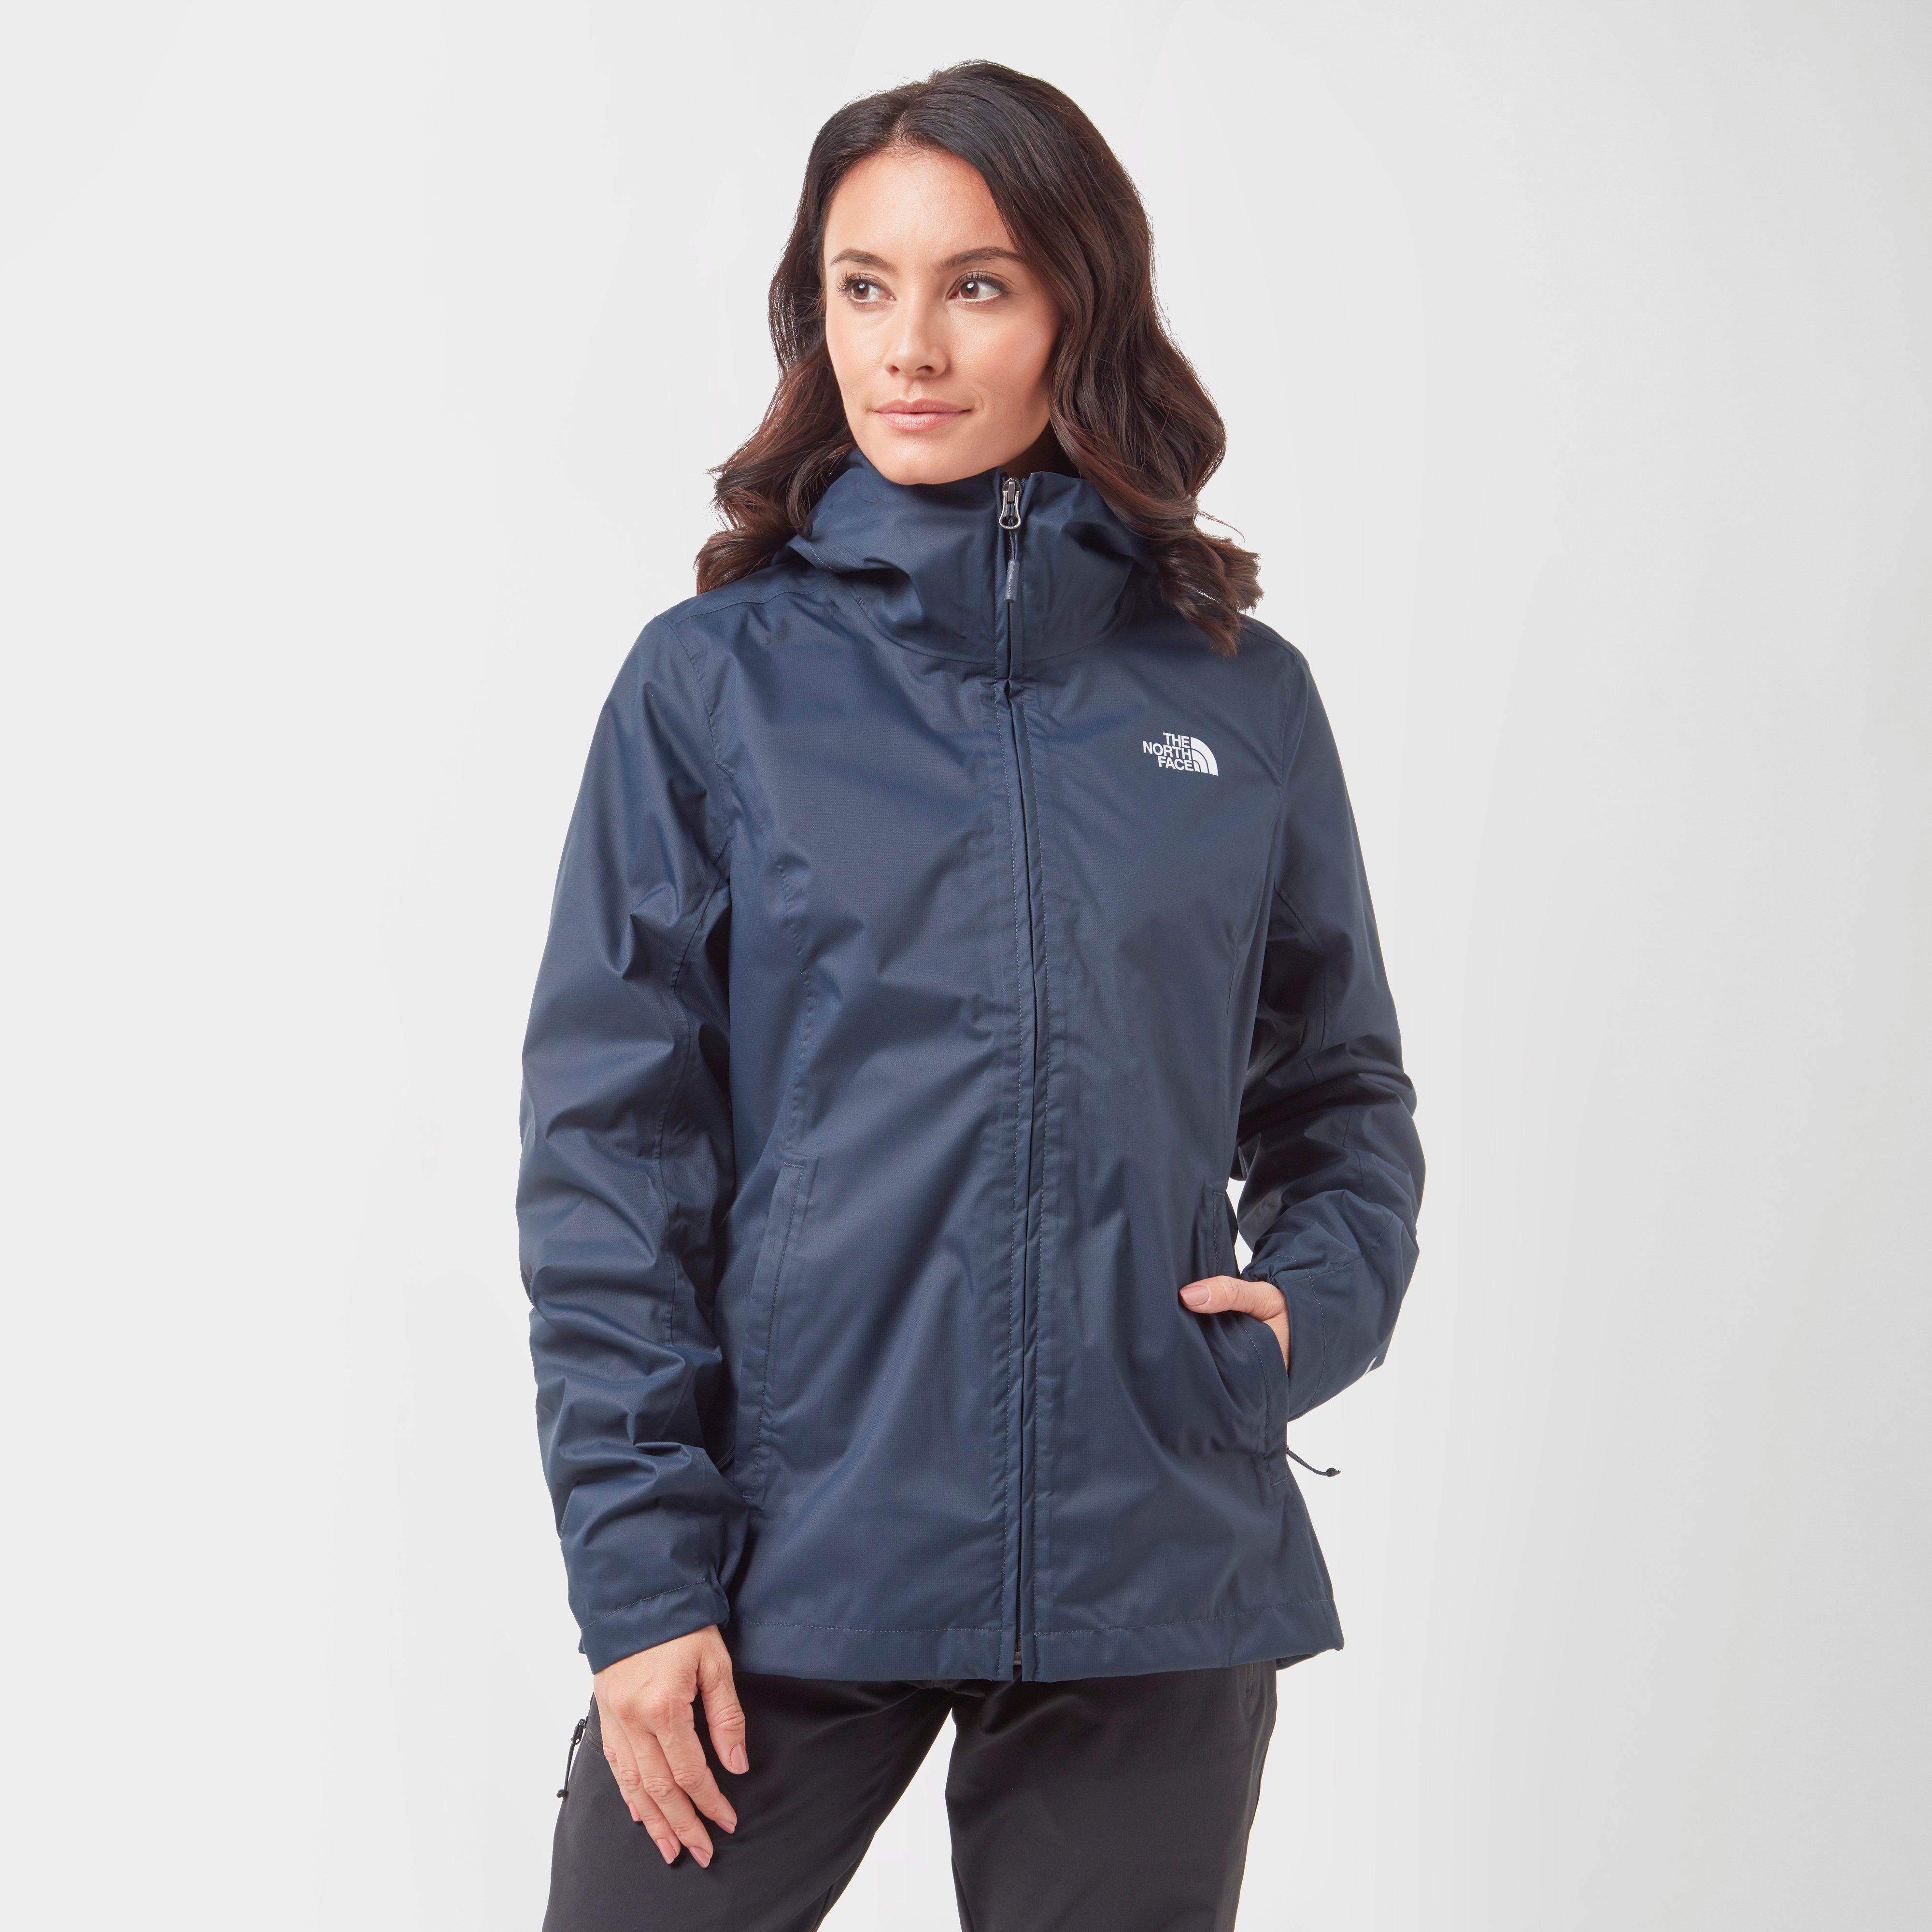 north face women's jacket triclimate